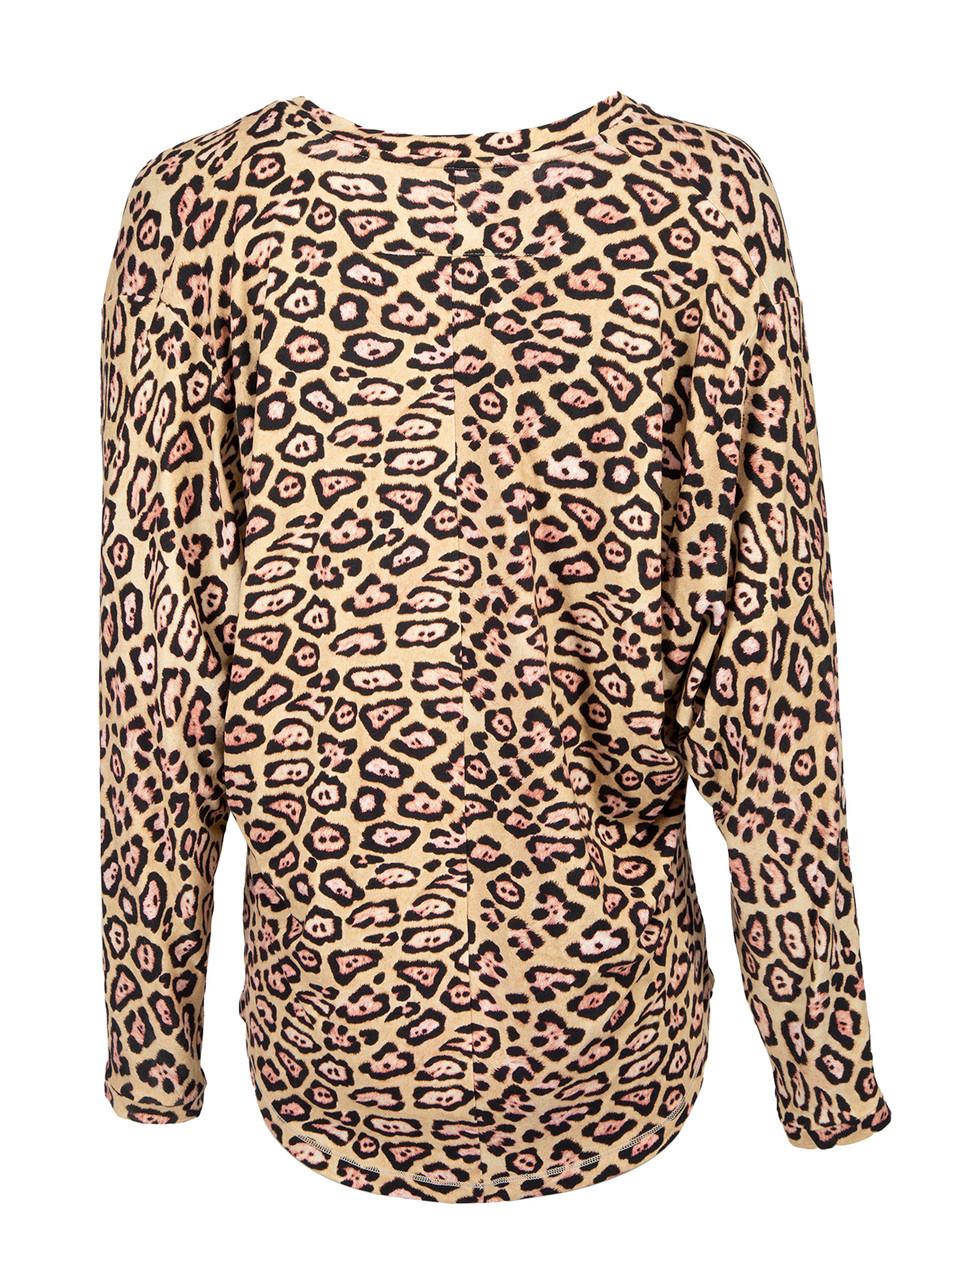 Givenchy Brown Leopard Print Long Sleeved Blouse Size M In Good Condition For Sale In London, GB